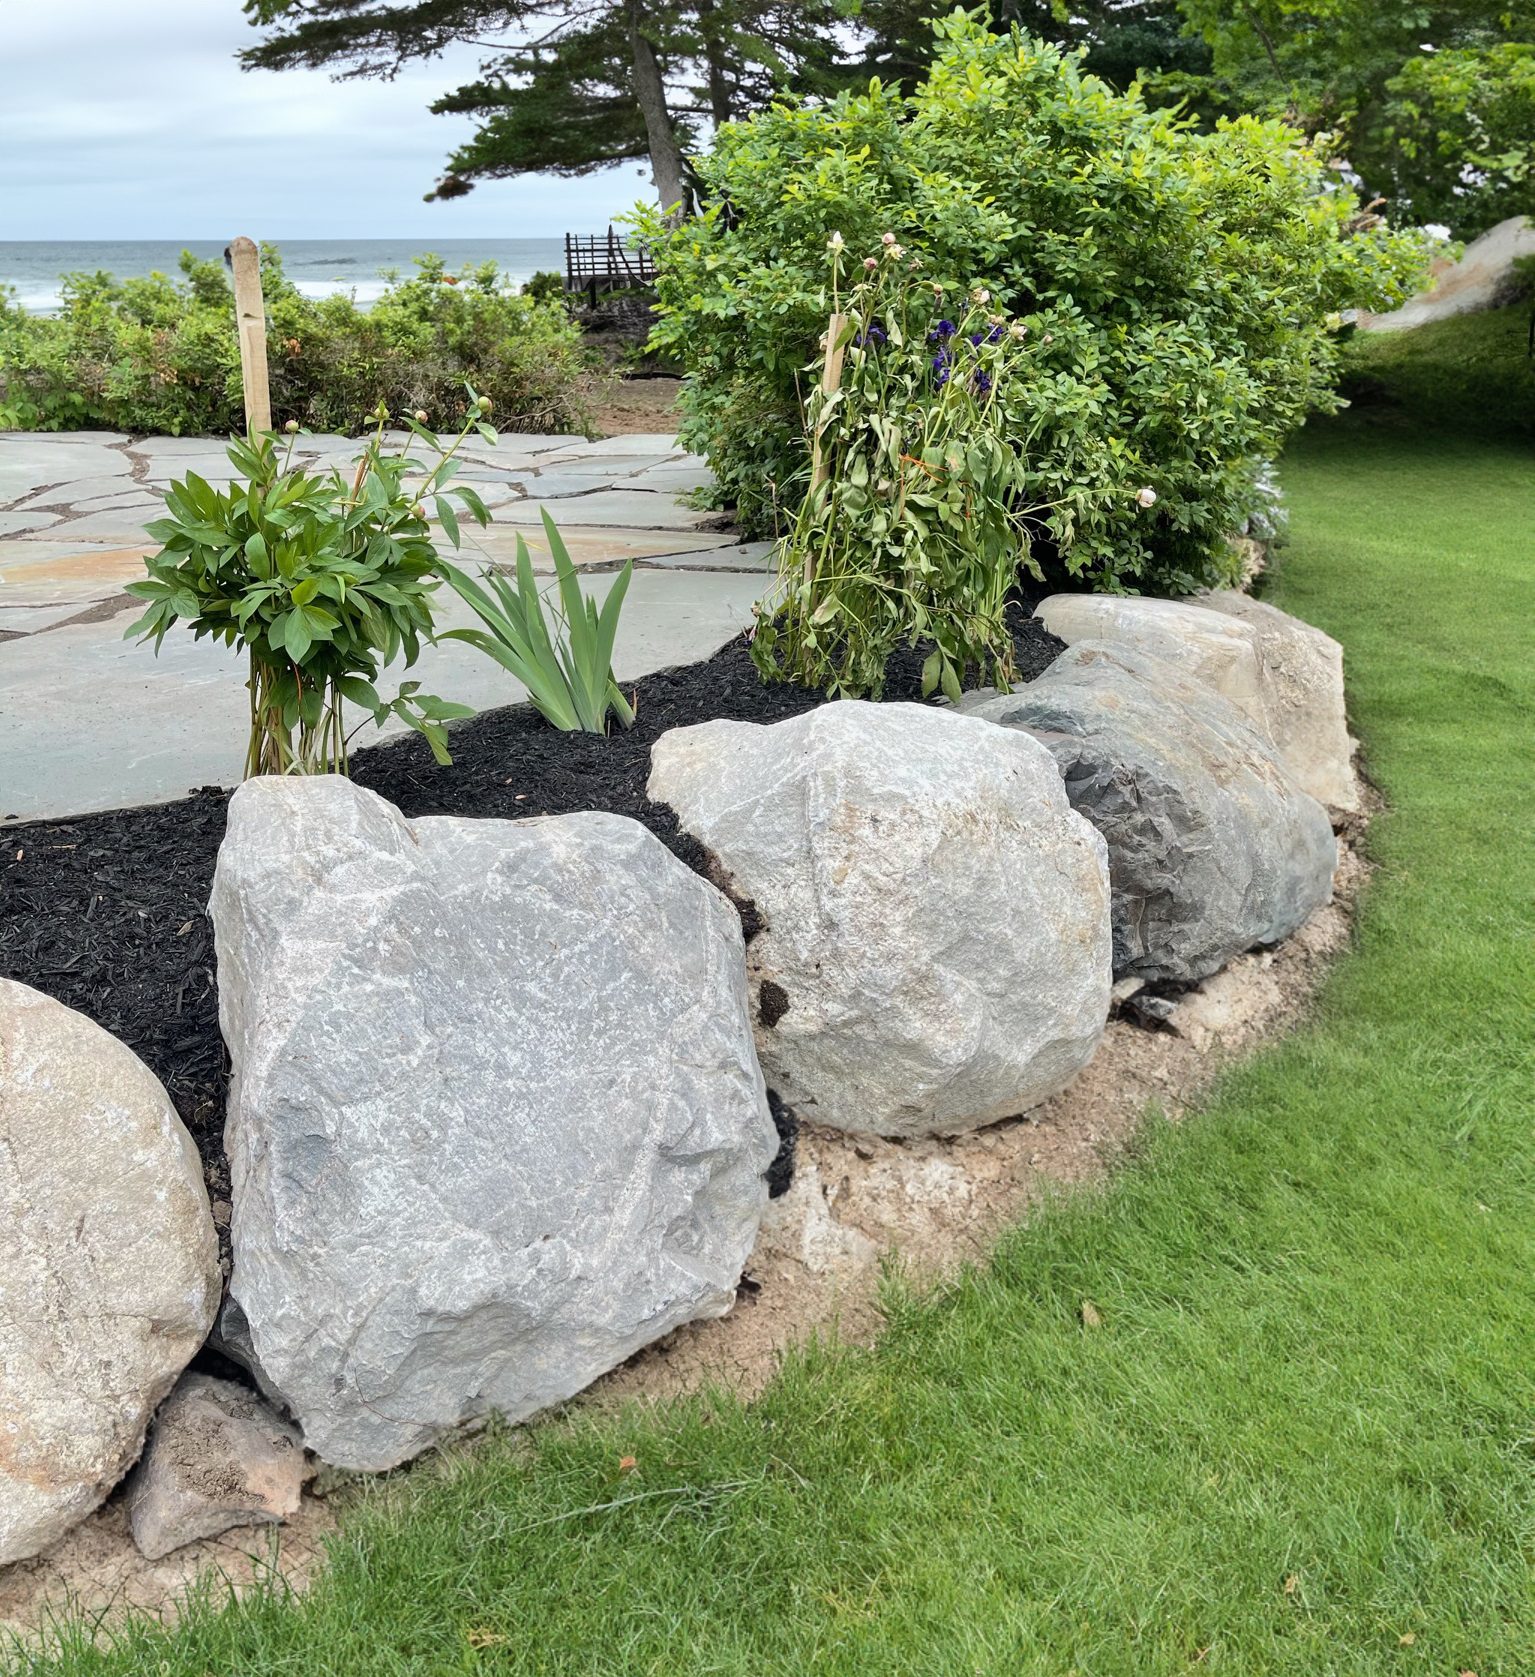 Boulders and rocks also provide functional benefits like erosion control